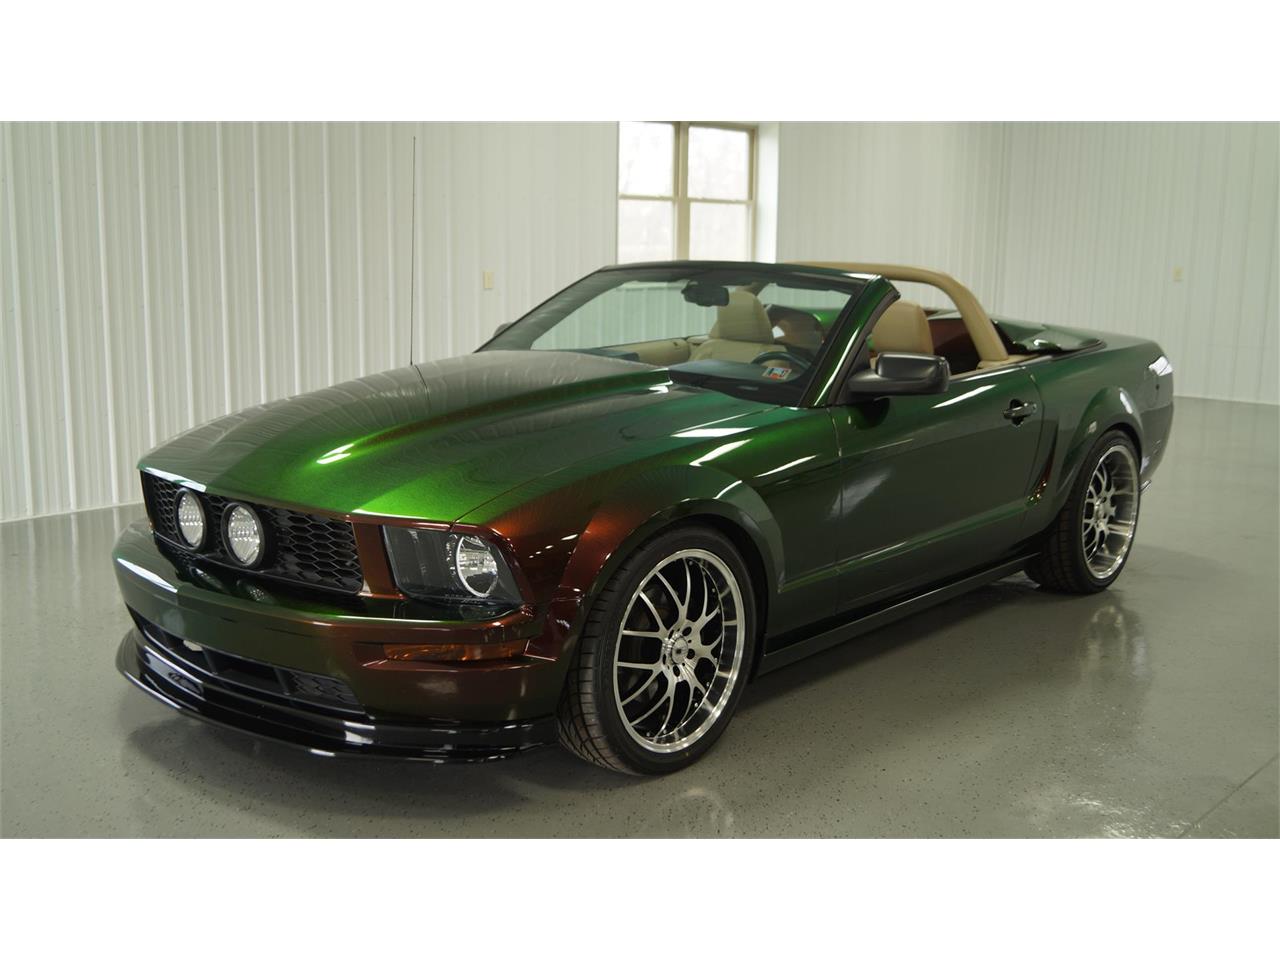 2007 Ford Mustang GT for Sale | ClassicCars.com | CC-776046